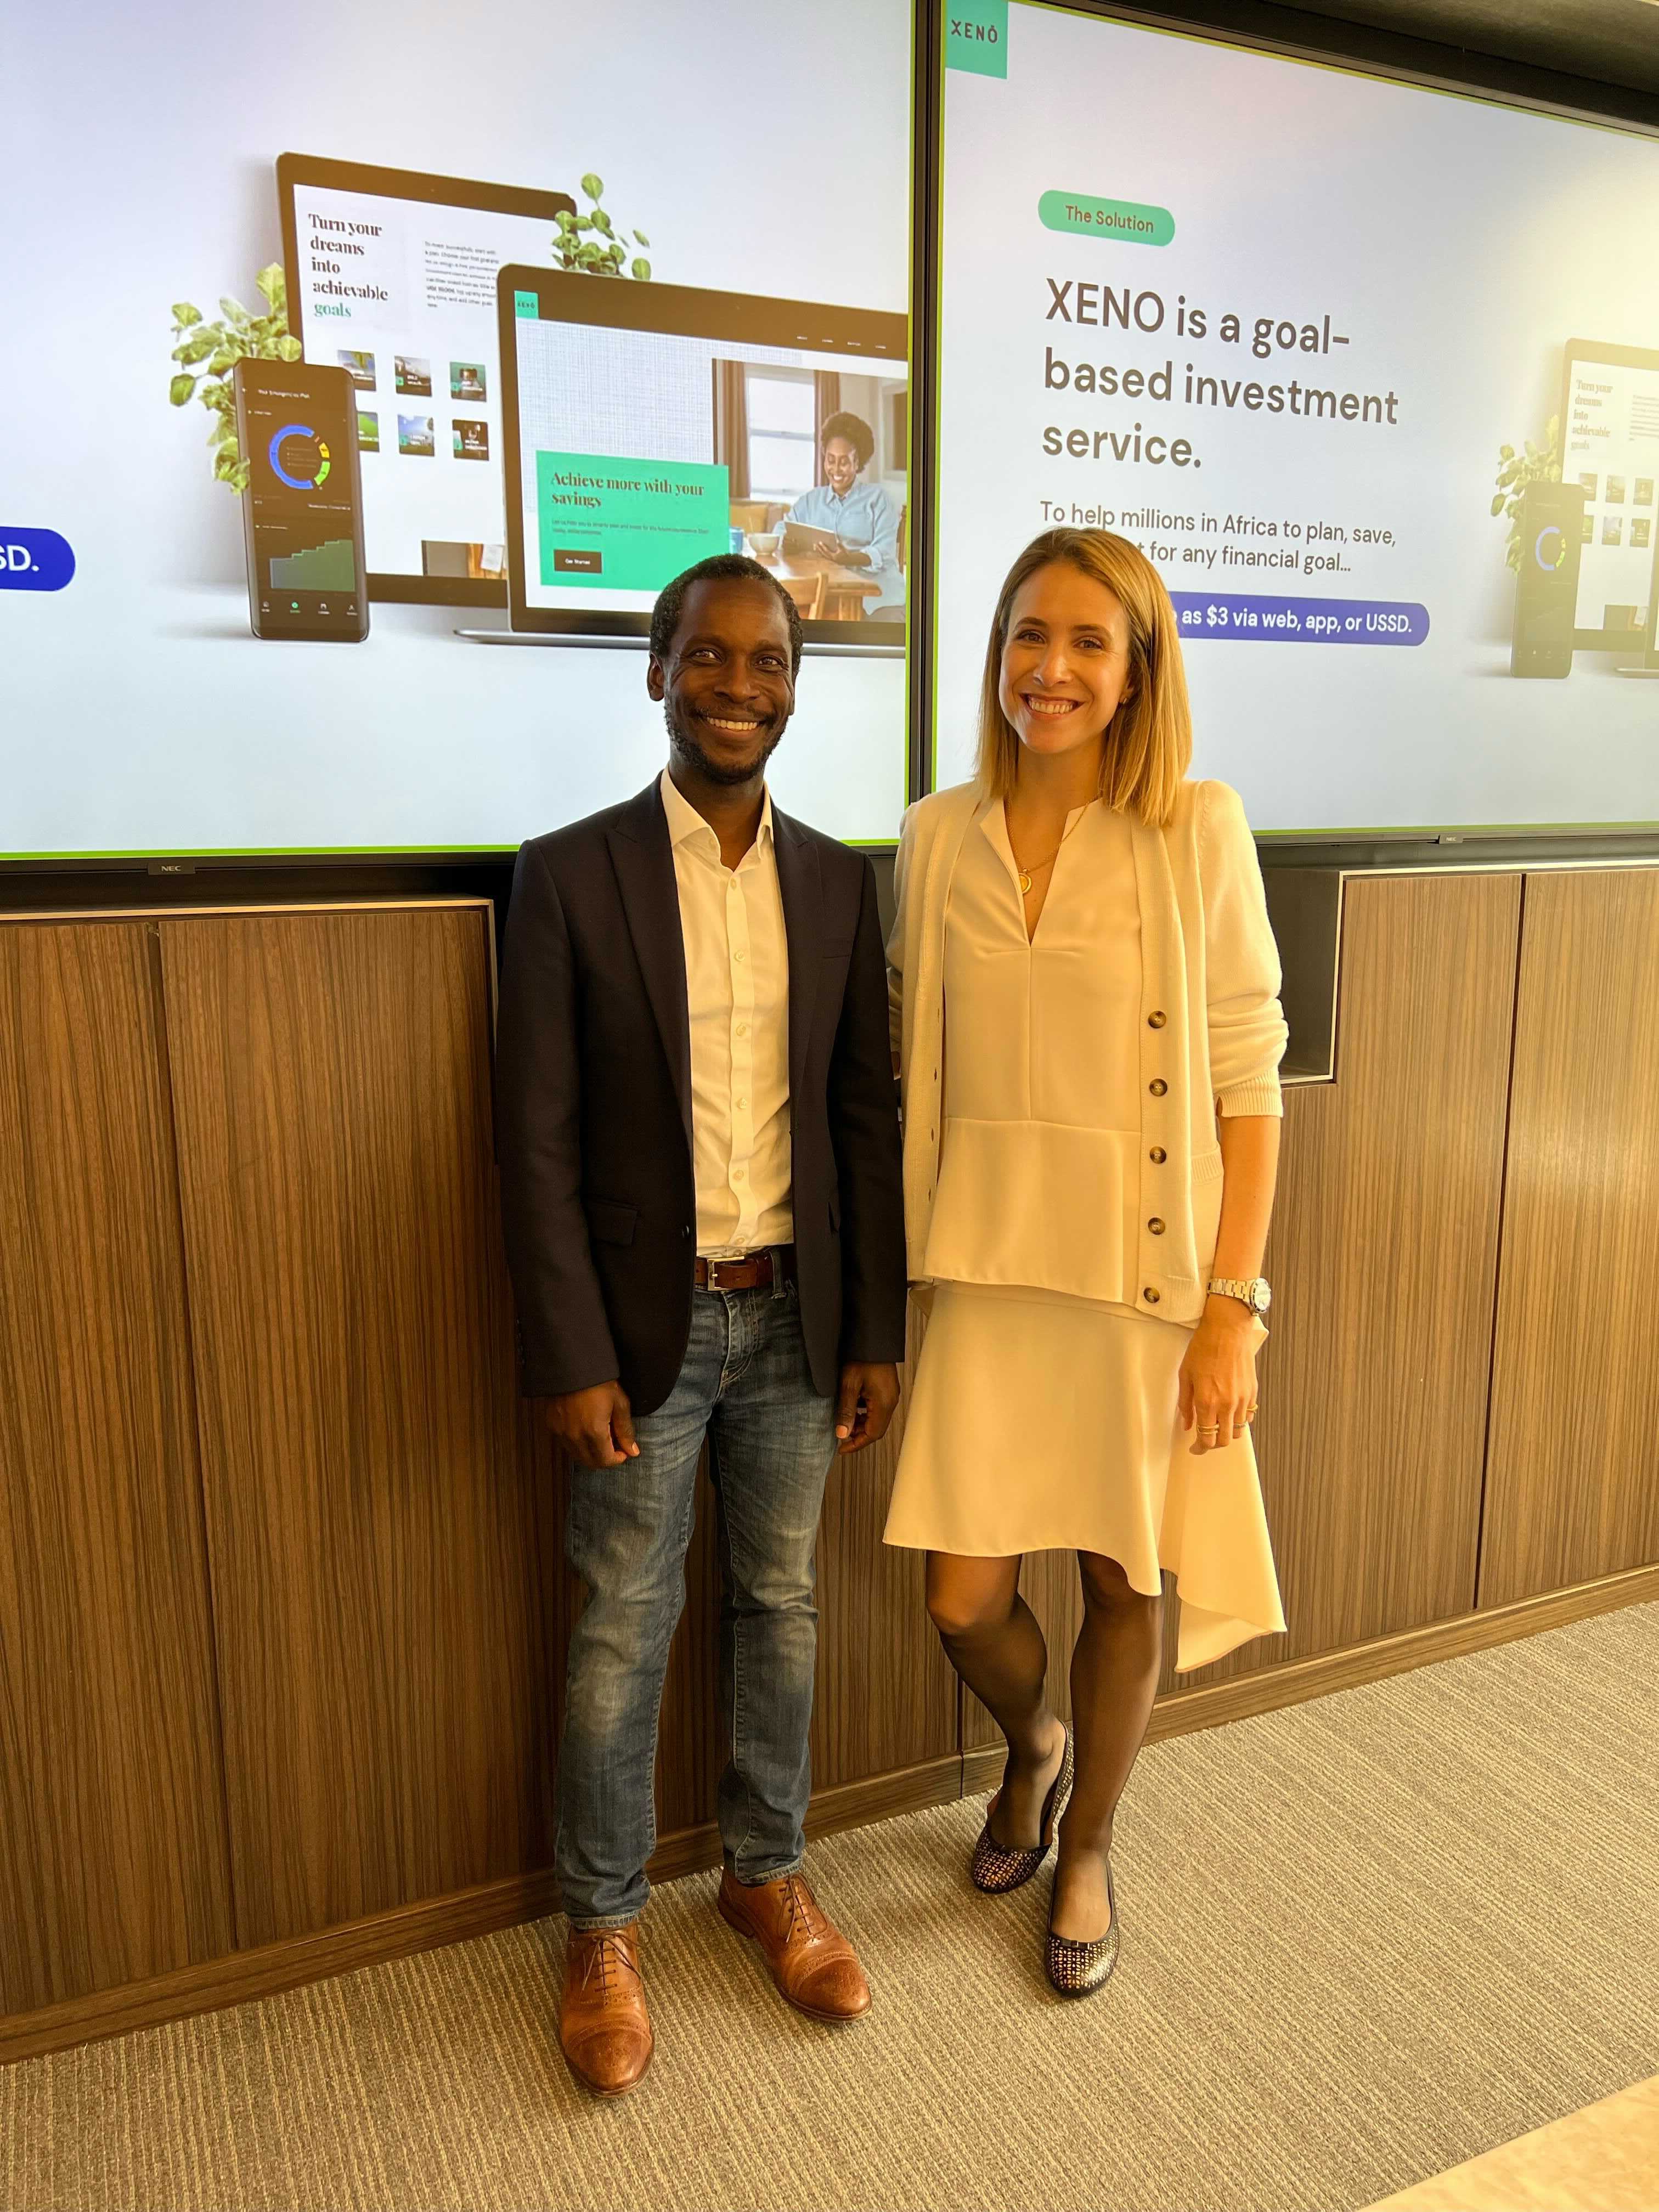 Aeko Ongodia, CEO of XENO, with Eva Yazhari, General Partner of Beyond Capital Ventures, at a recent event.